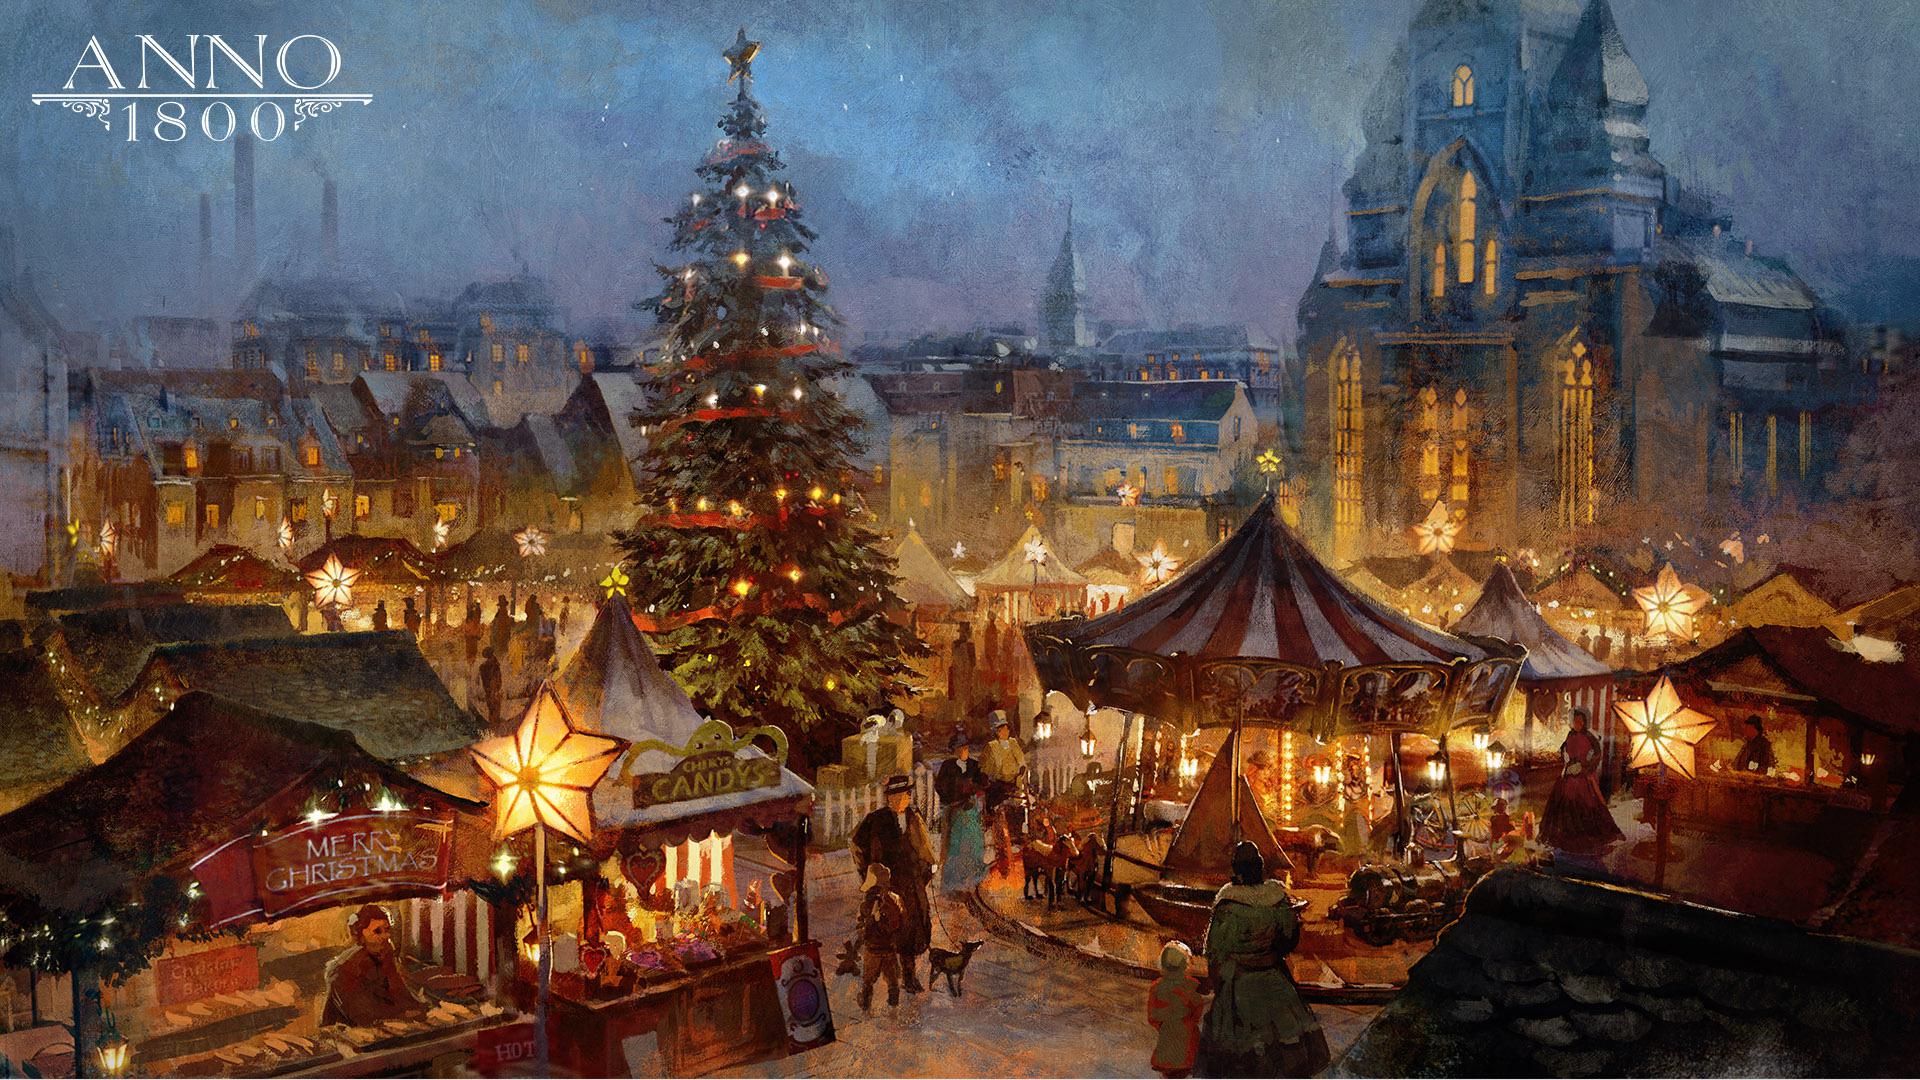 1920x1080 Christmas wallpapers : anno